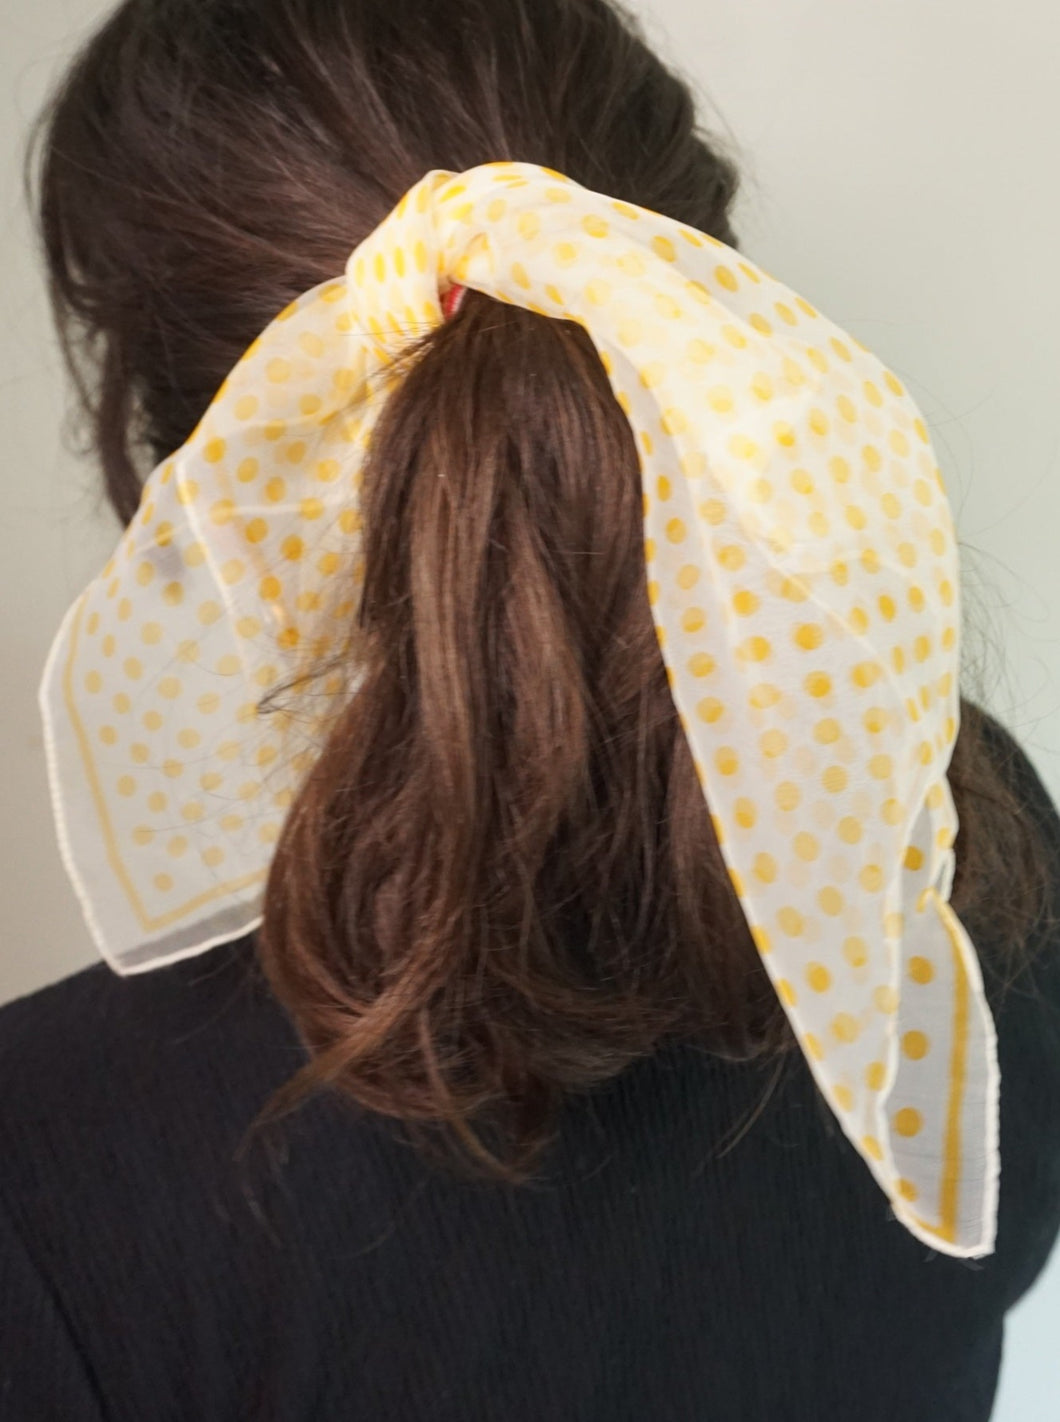 Transparent square with yellow polka dots